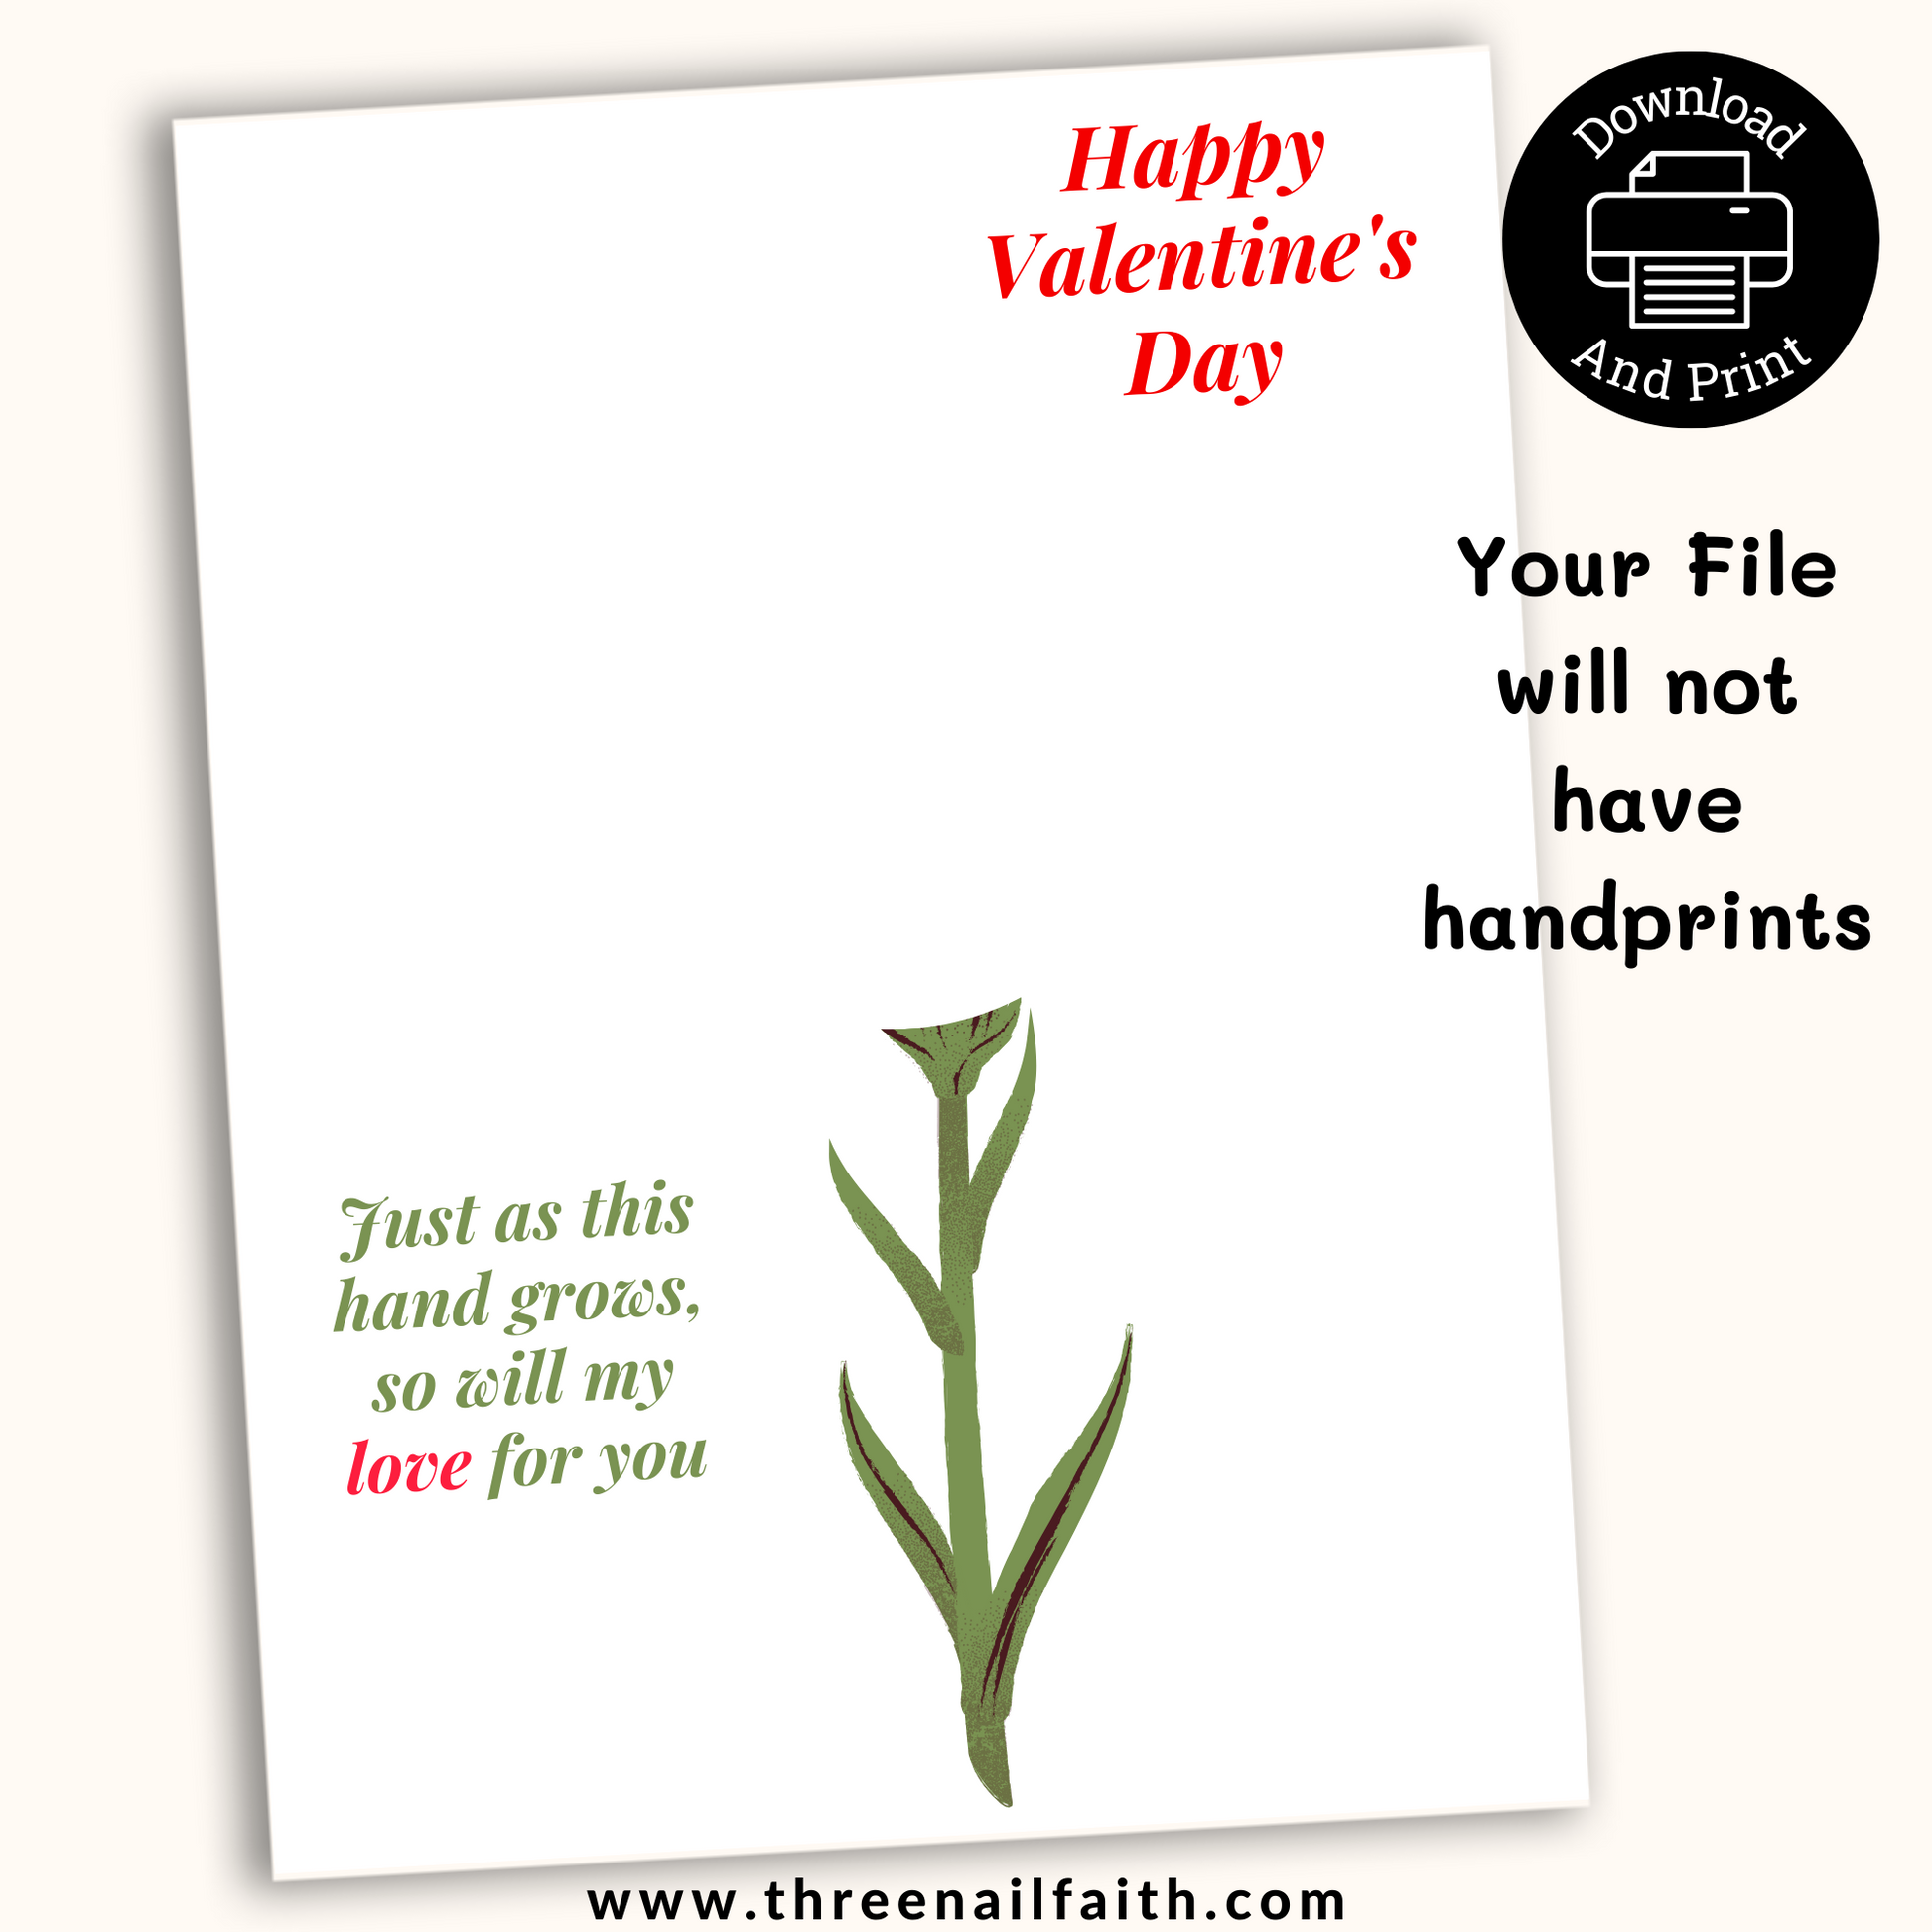  PRINTABLE Valentine FLOWER handprint Art Craft For Kids your file will not have the handprint